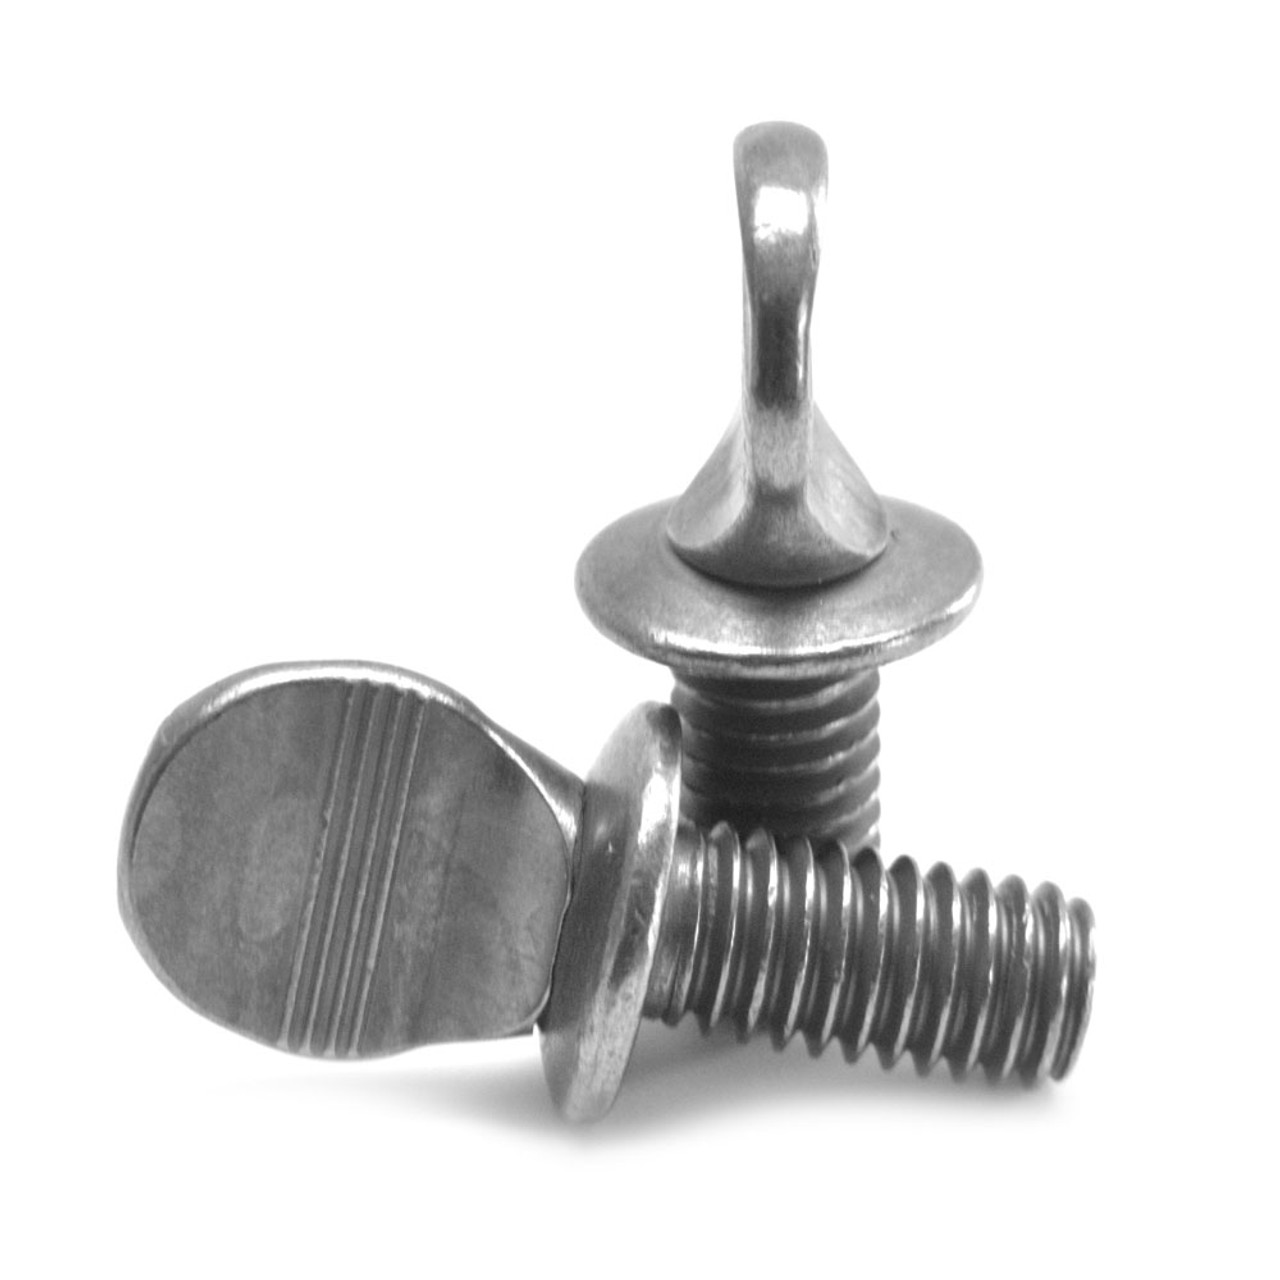 3/8-16 x 3/4 Coarse Thread Thumb Screw Type A With Shoulder Low Carbon Steel Plain Finish